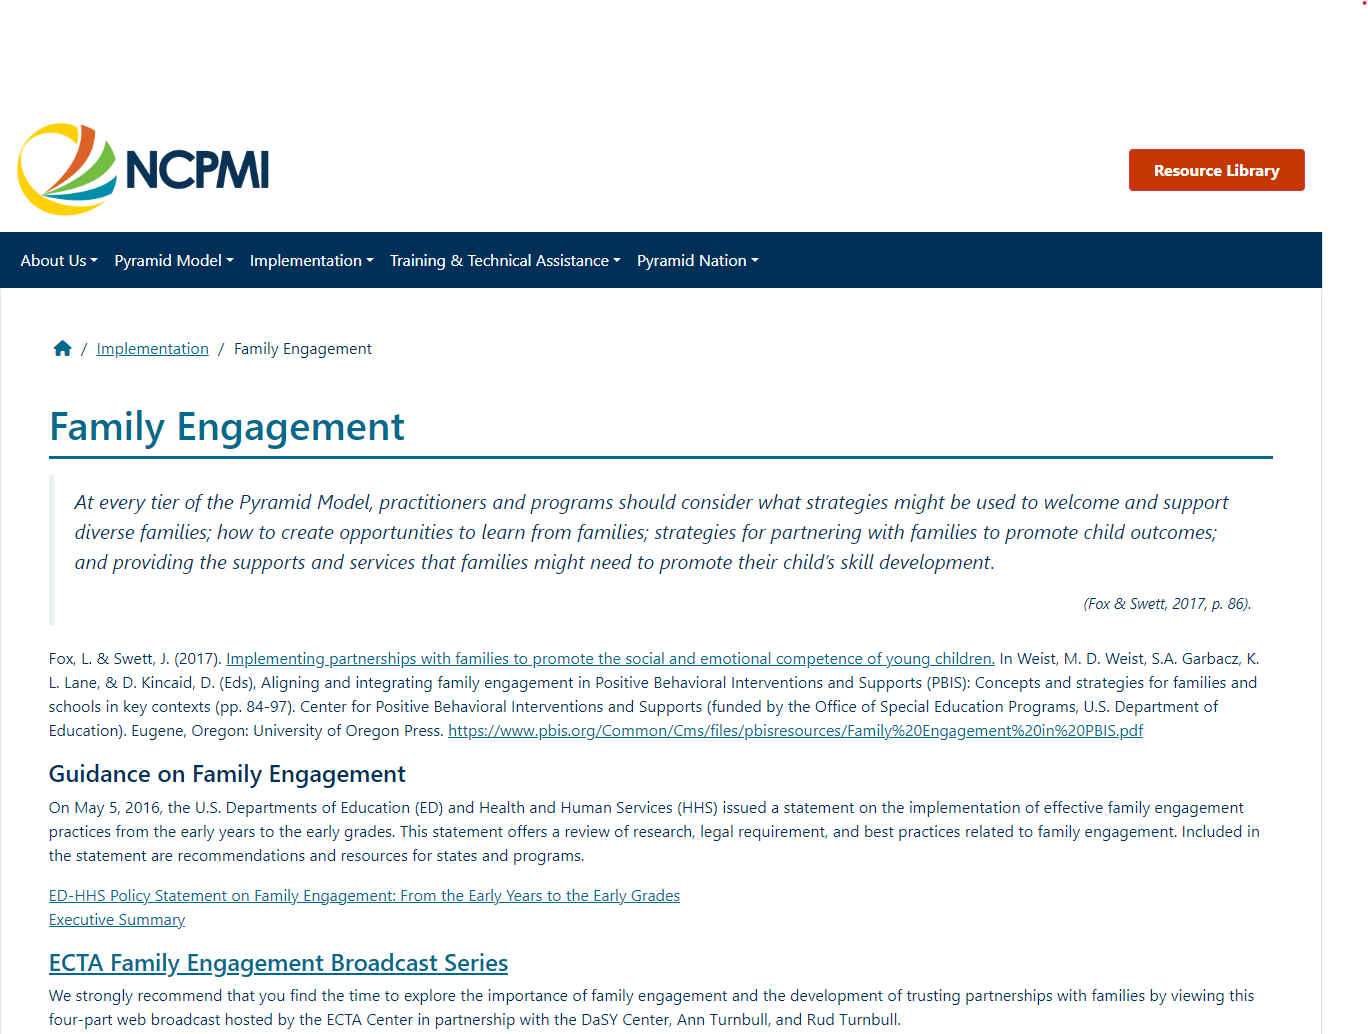 National Center for Pyramid Model Innovations (NCPMI): Family Engagement and Parent Resources